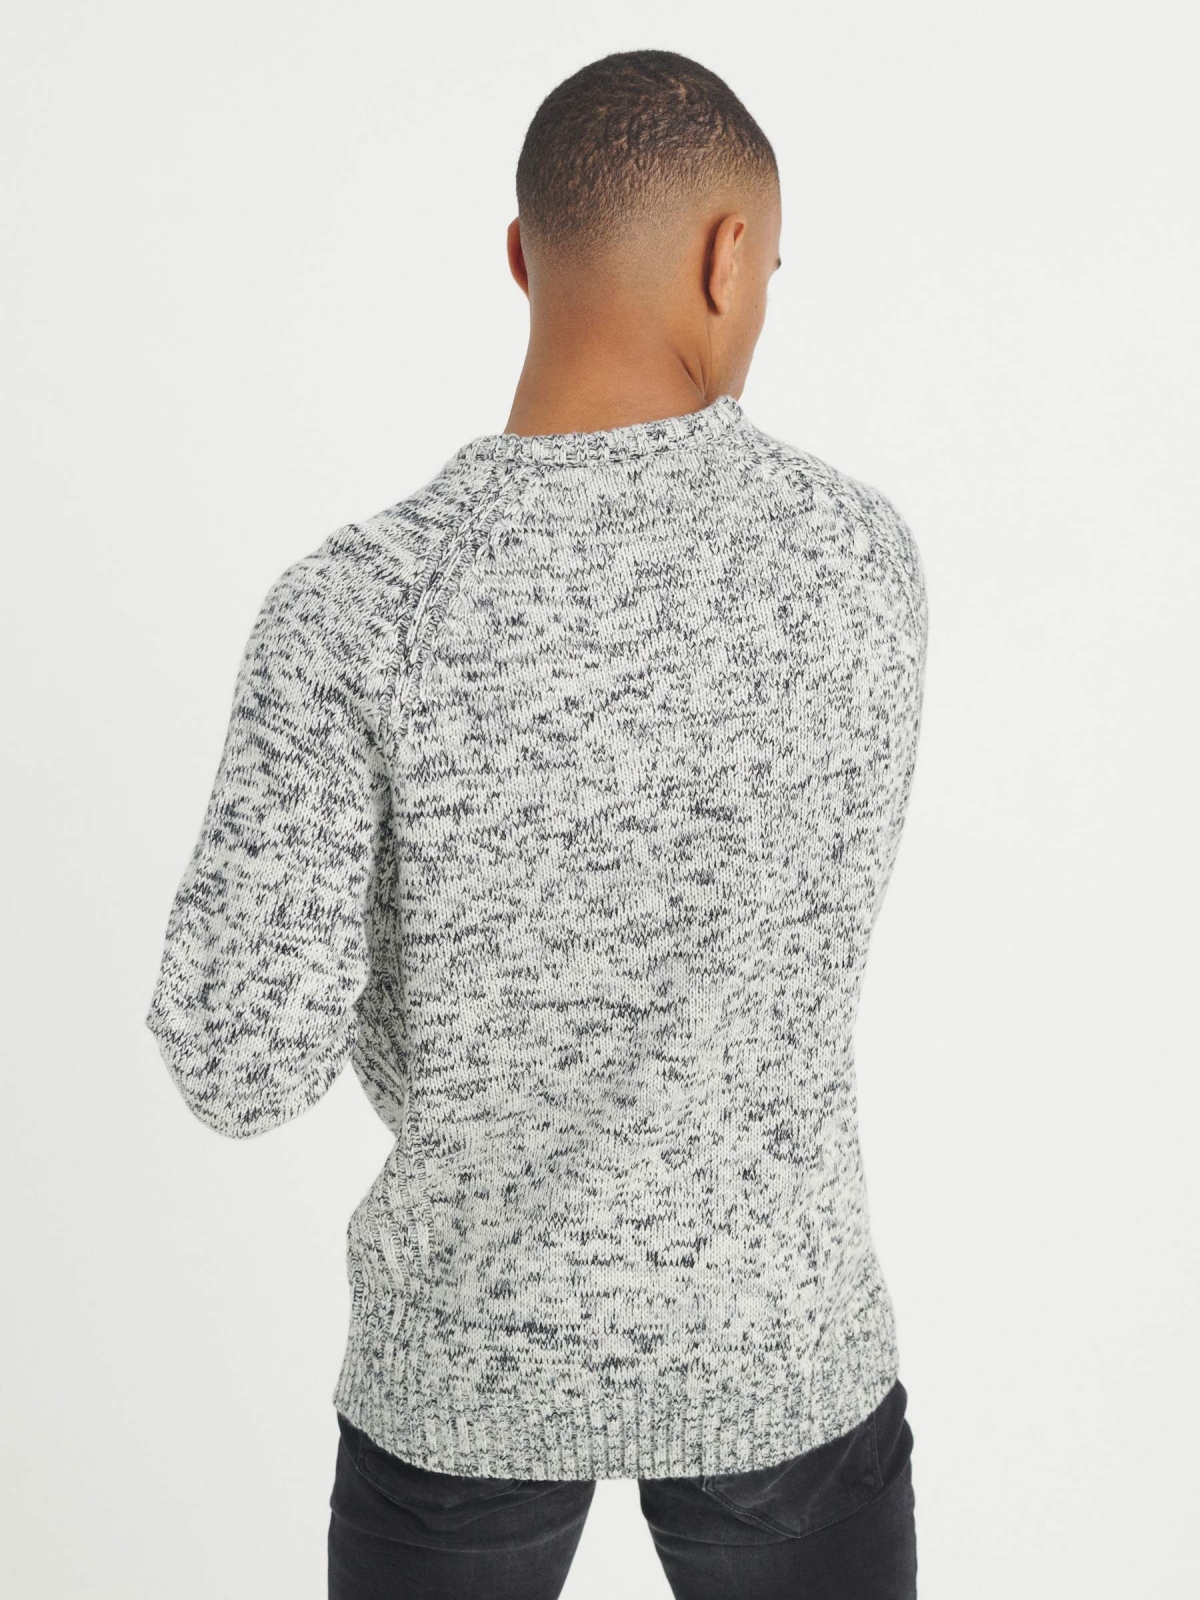 Marbled knitted sweater light grey middle back view